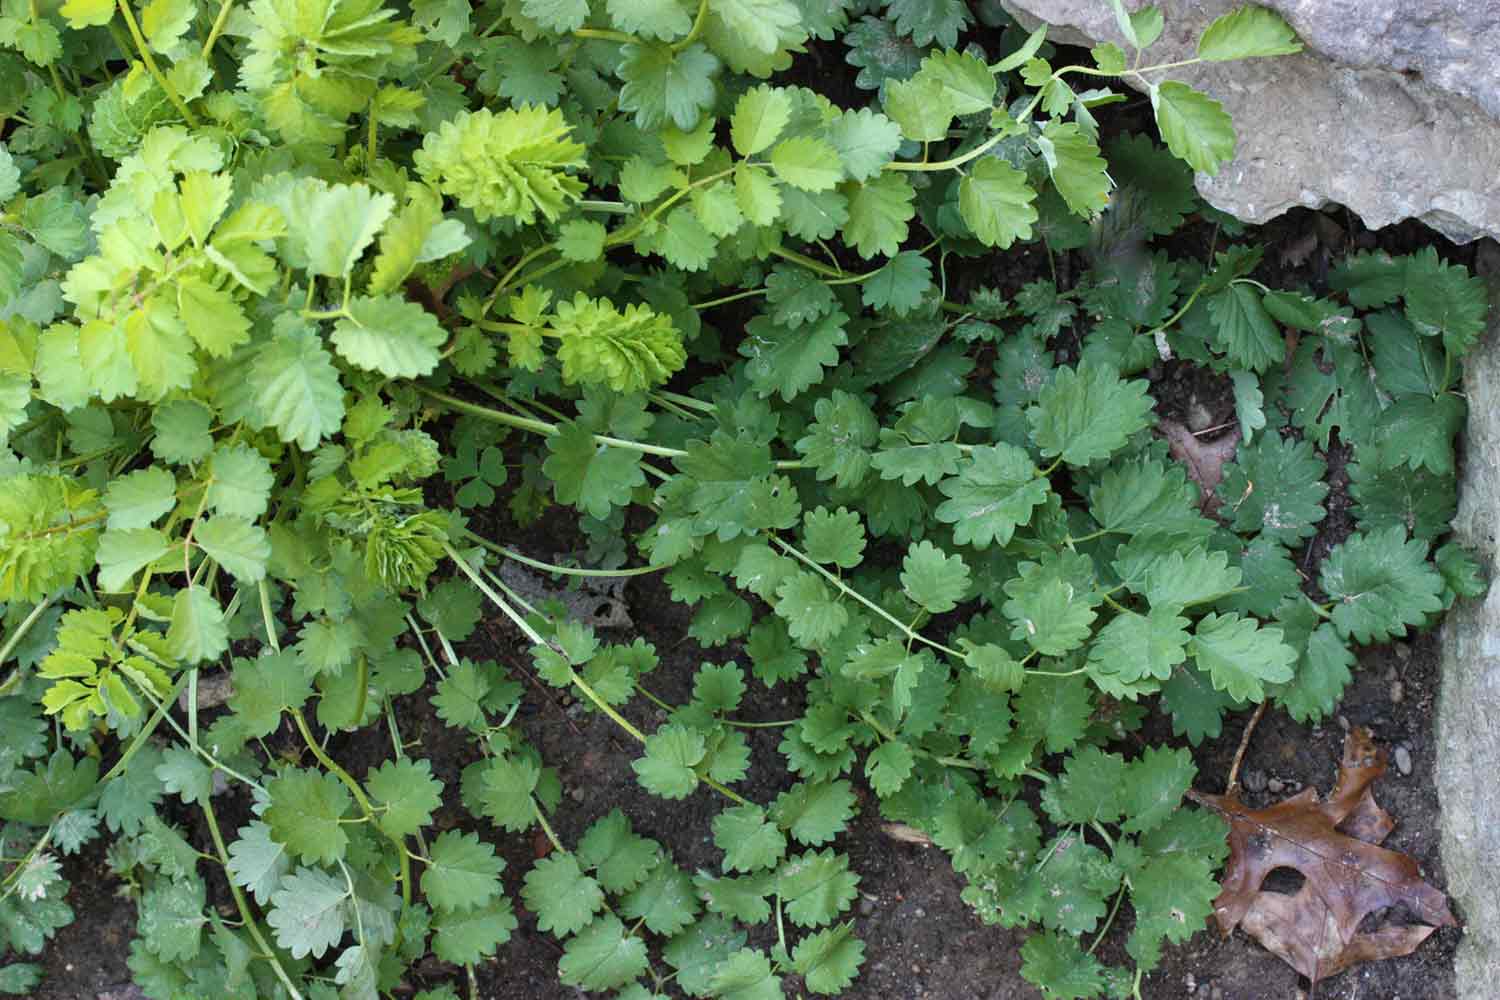 View of a salad burnet plant from above.